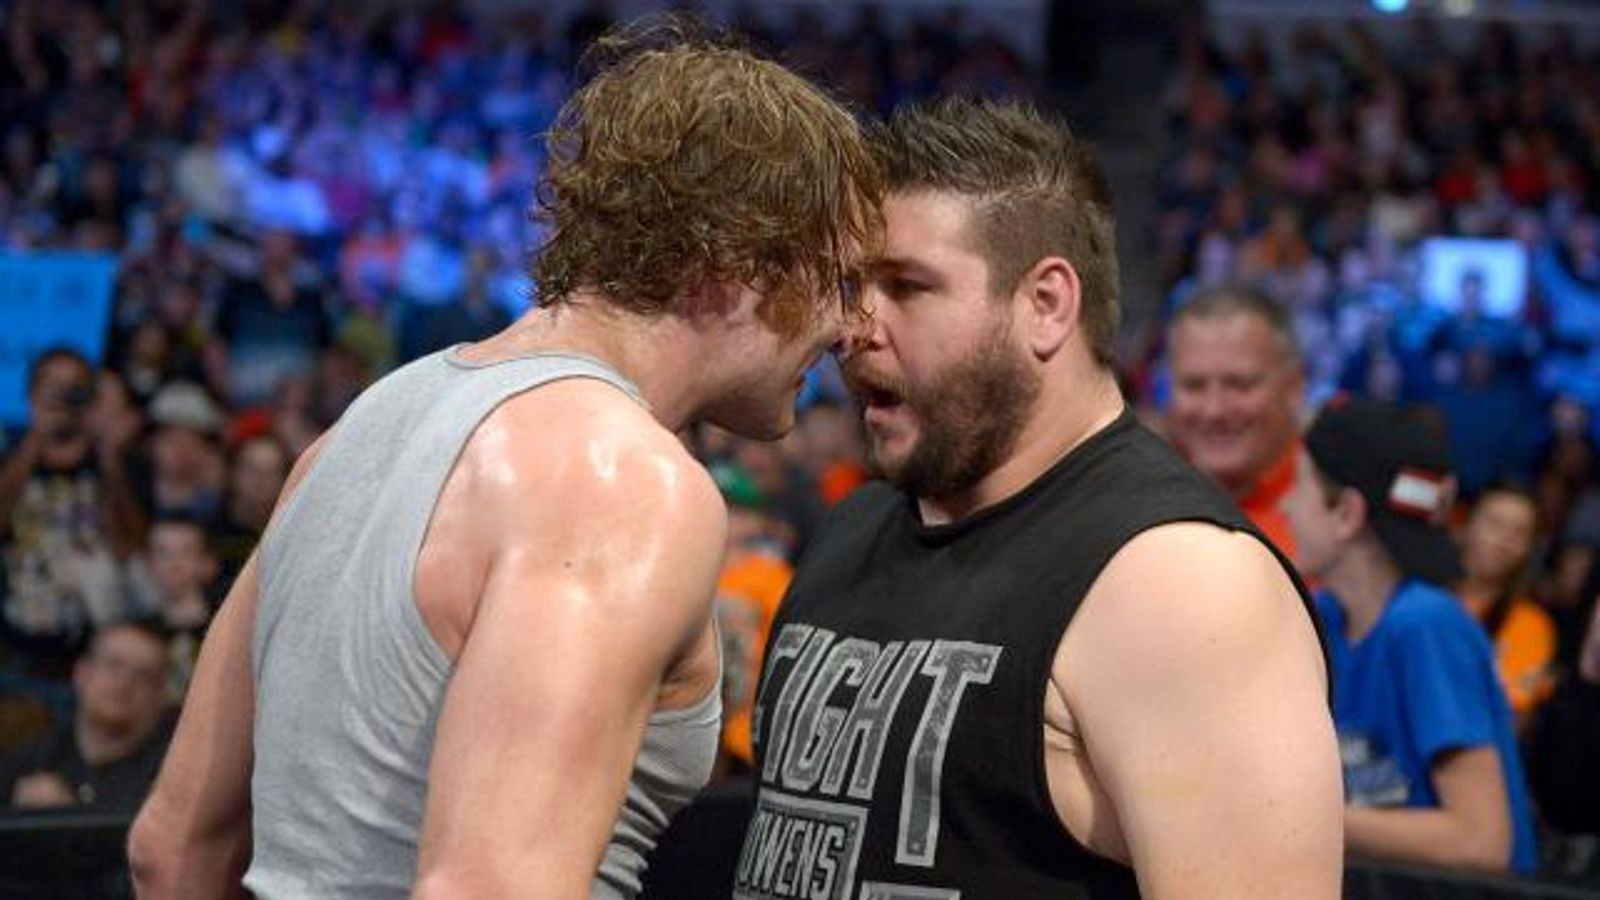 WWE Smackdown Interactivo 206 desde Colisee Pepsi, Quebec, Canadá Dean-ambrose-kevin-owens-wwe-smackdown-intercontinental-title_3381807